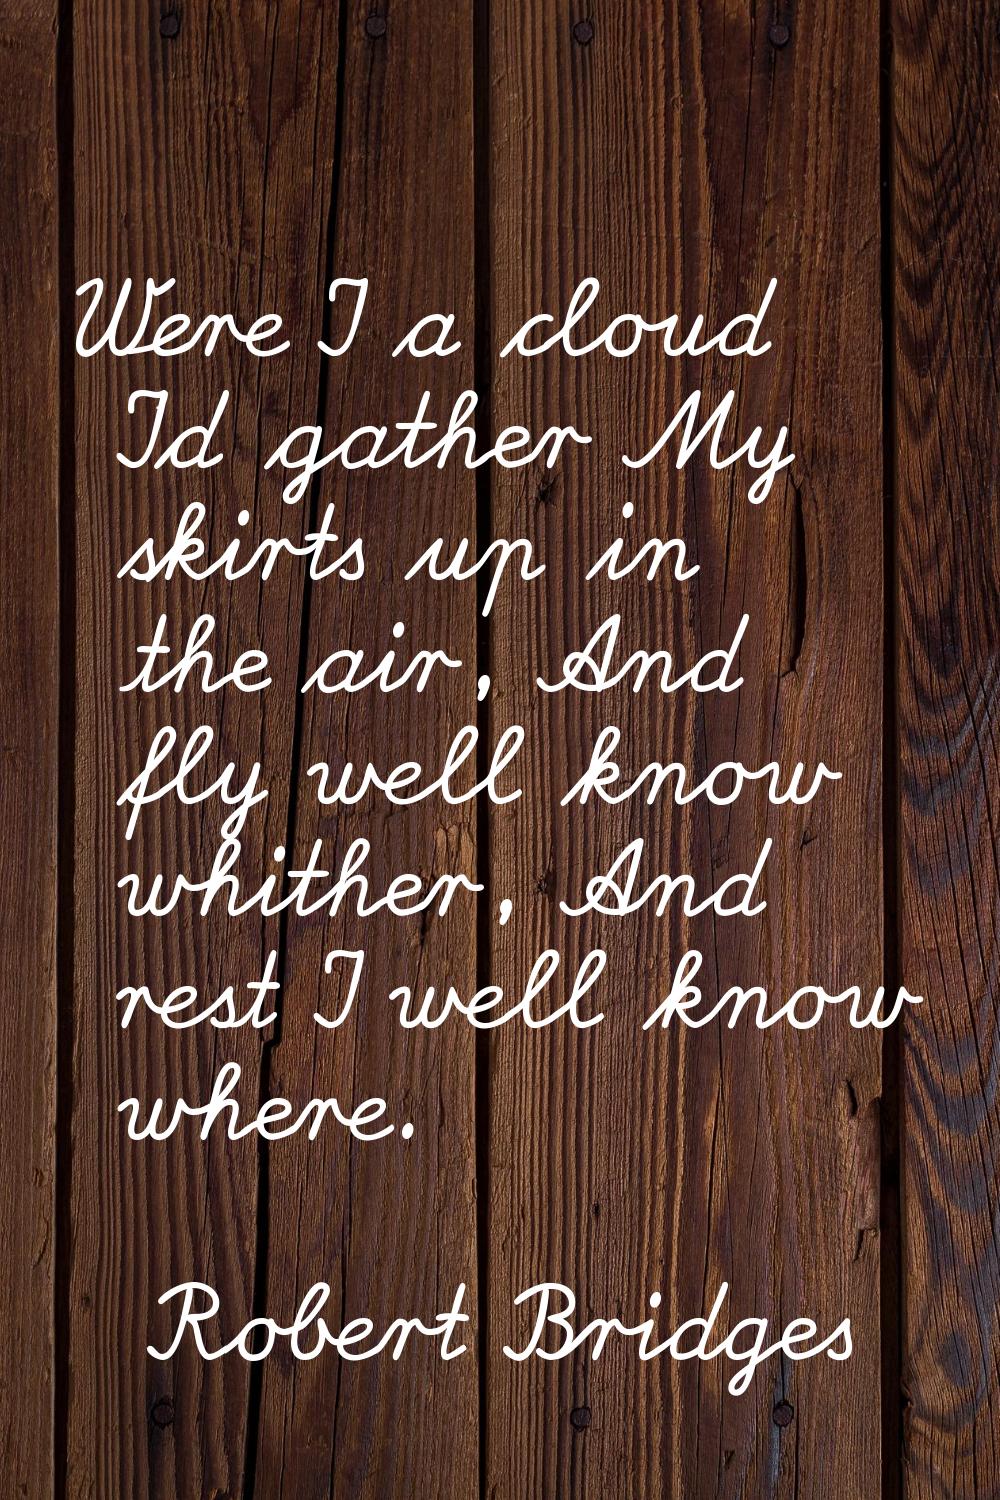 Were I a cloud I'd gather My skirts up in the air, And fly well know whither, And rest I well know 